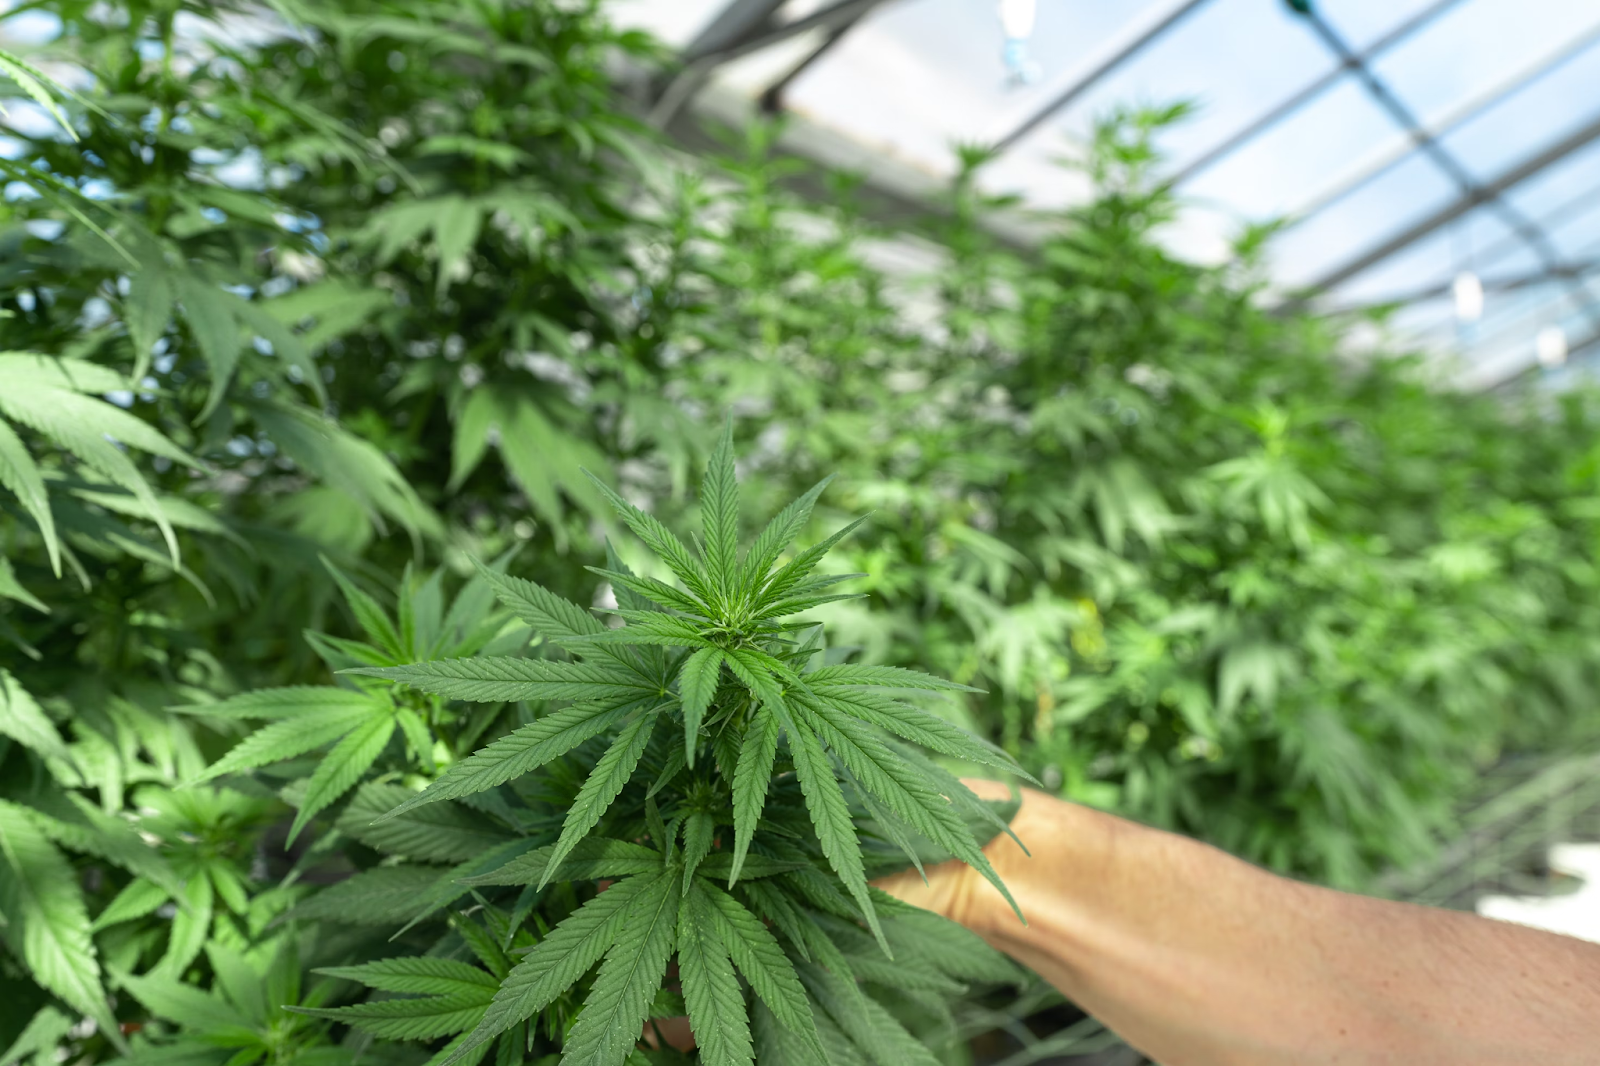 A hand holding a cannabis plant in a marijuana greenhouse 